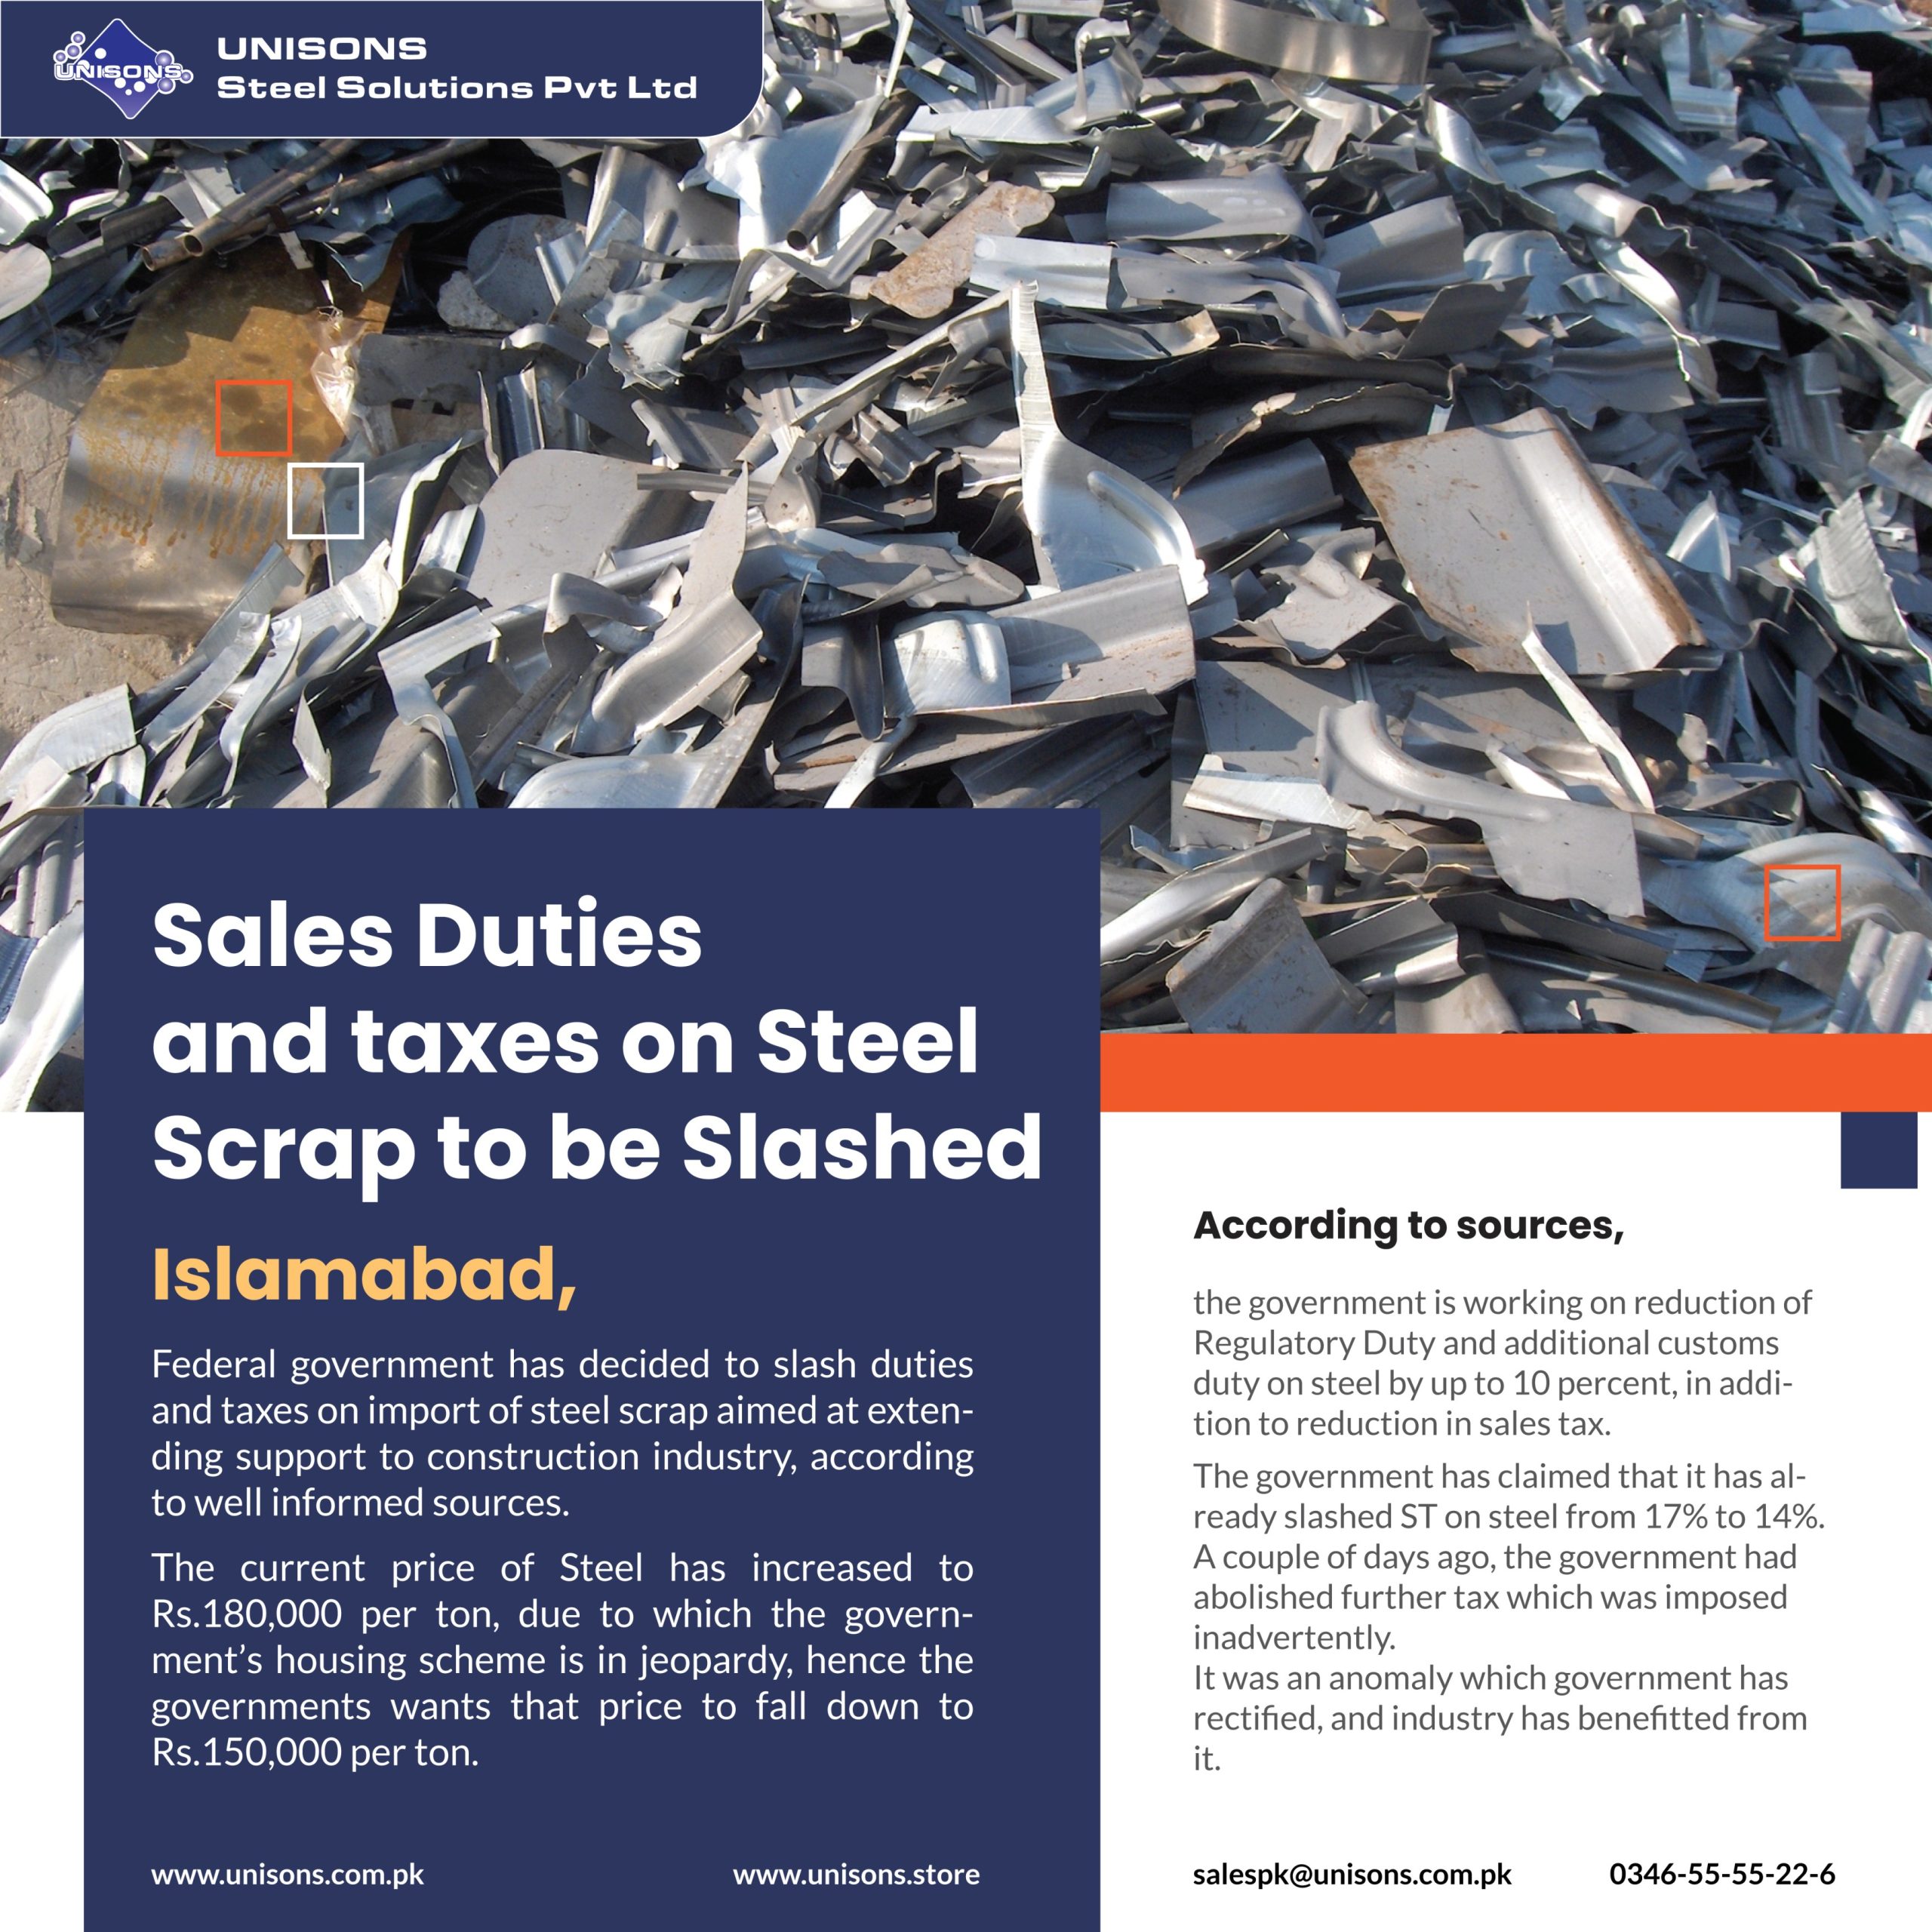 SALES DUTIES AND TAXES